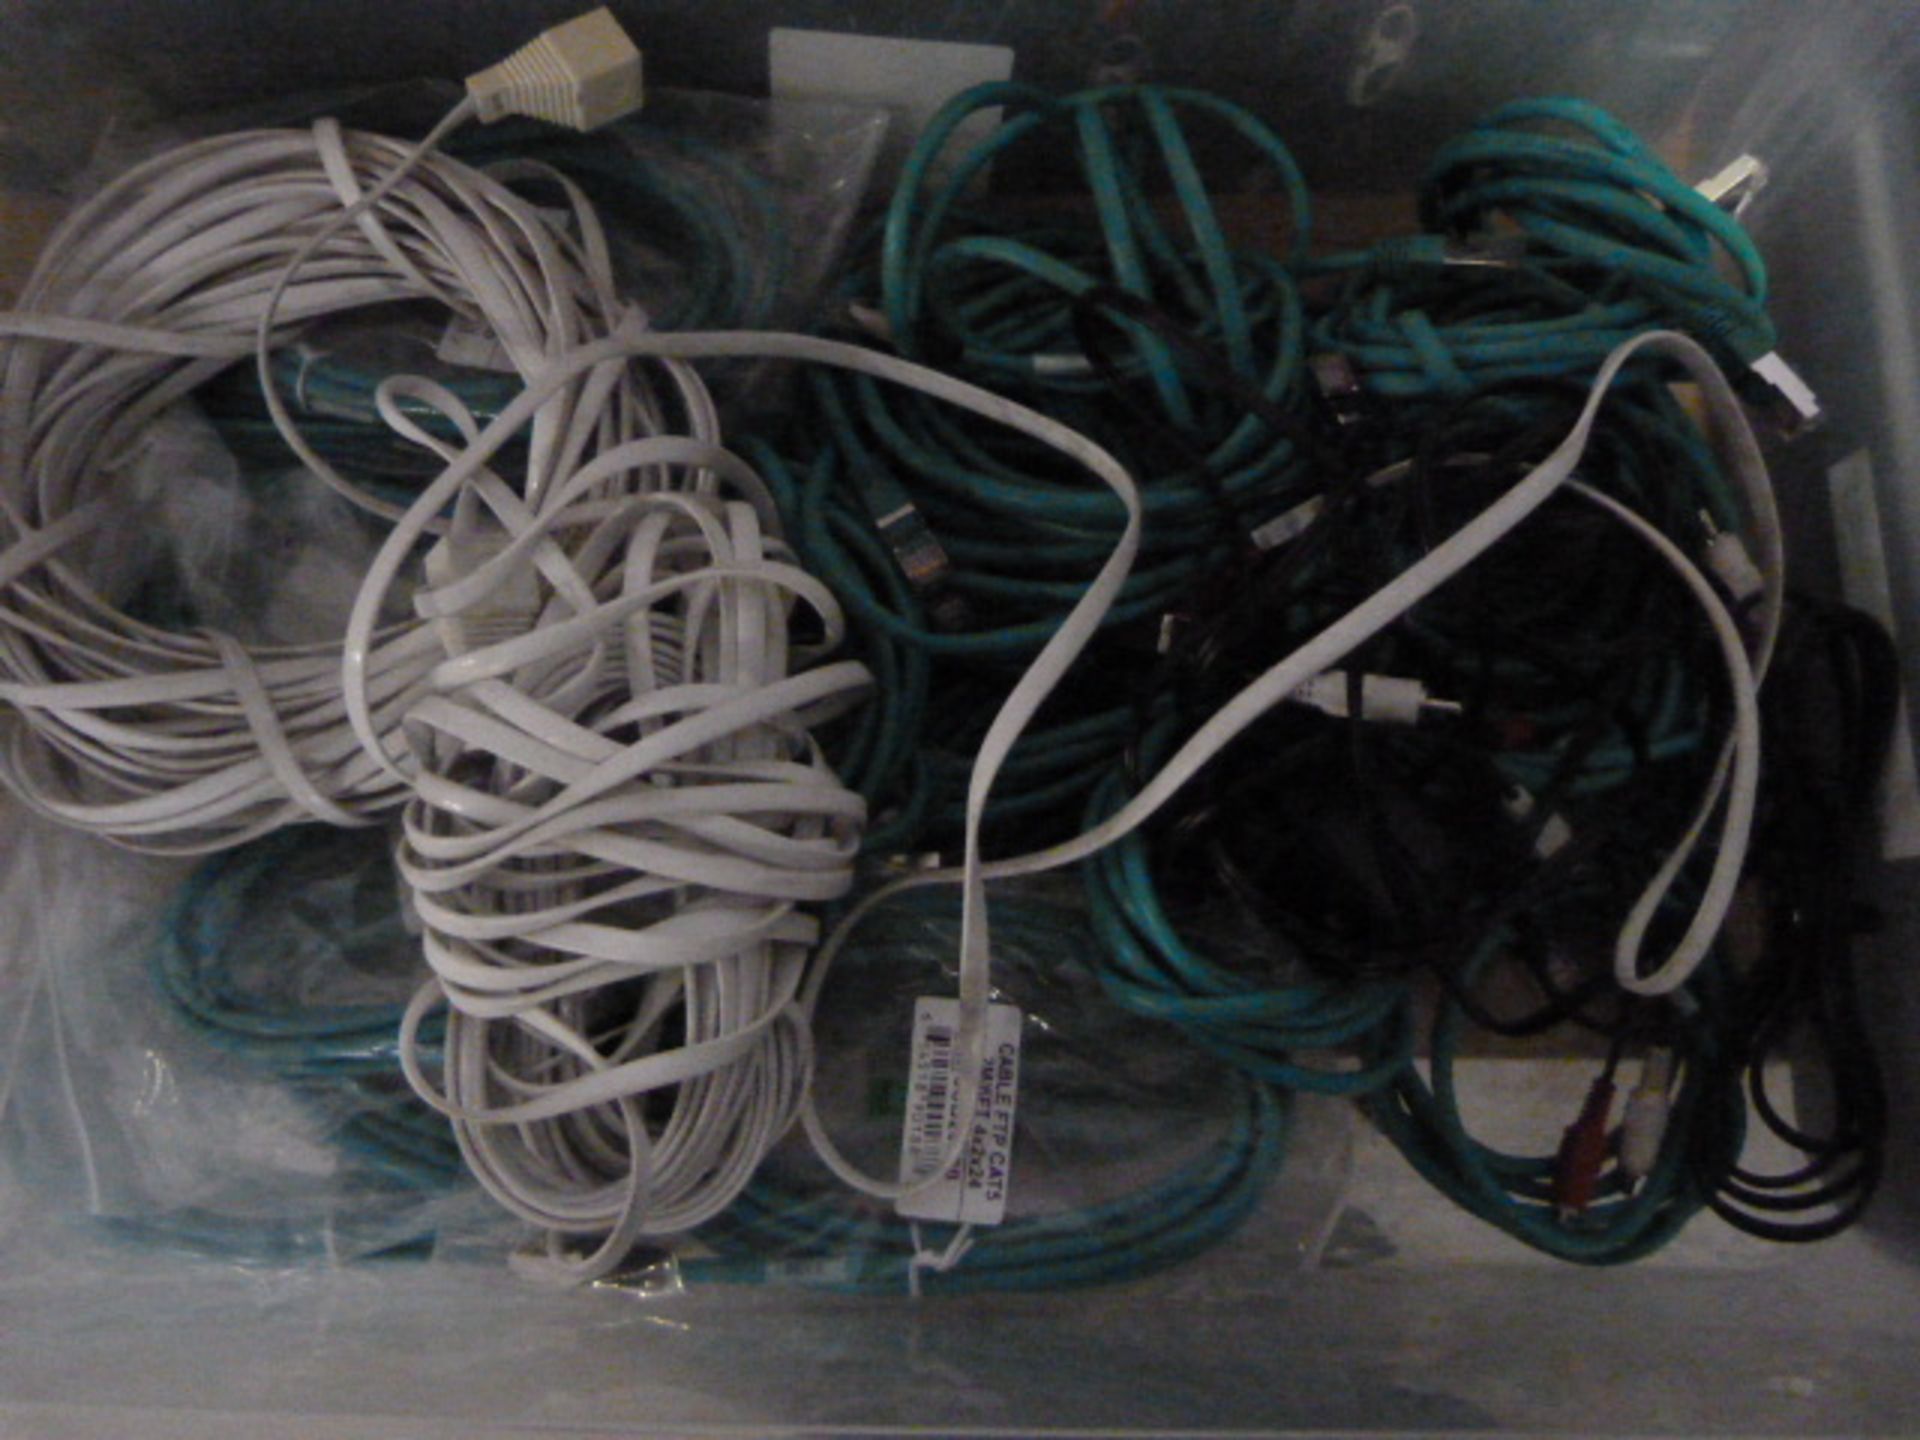 Assorted Computer Leads, Cables, etc.